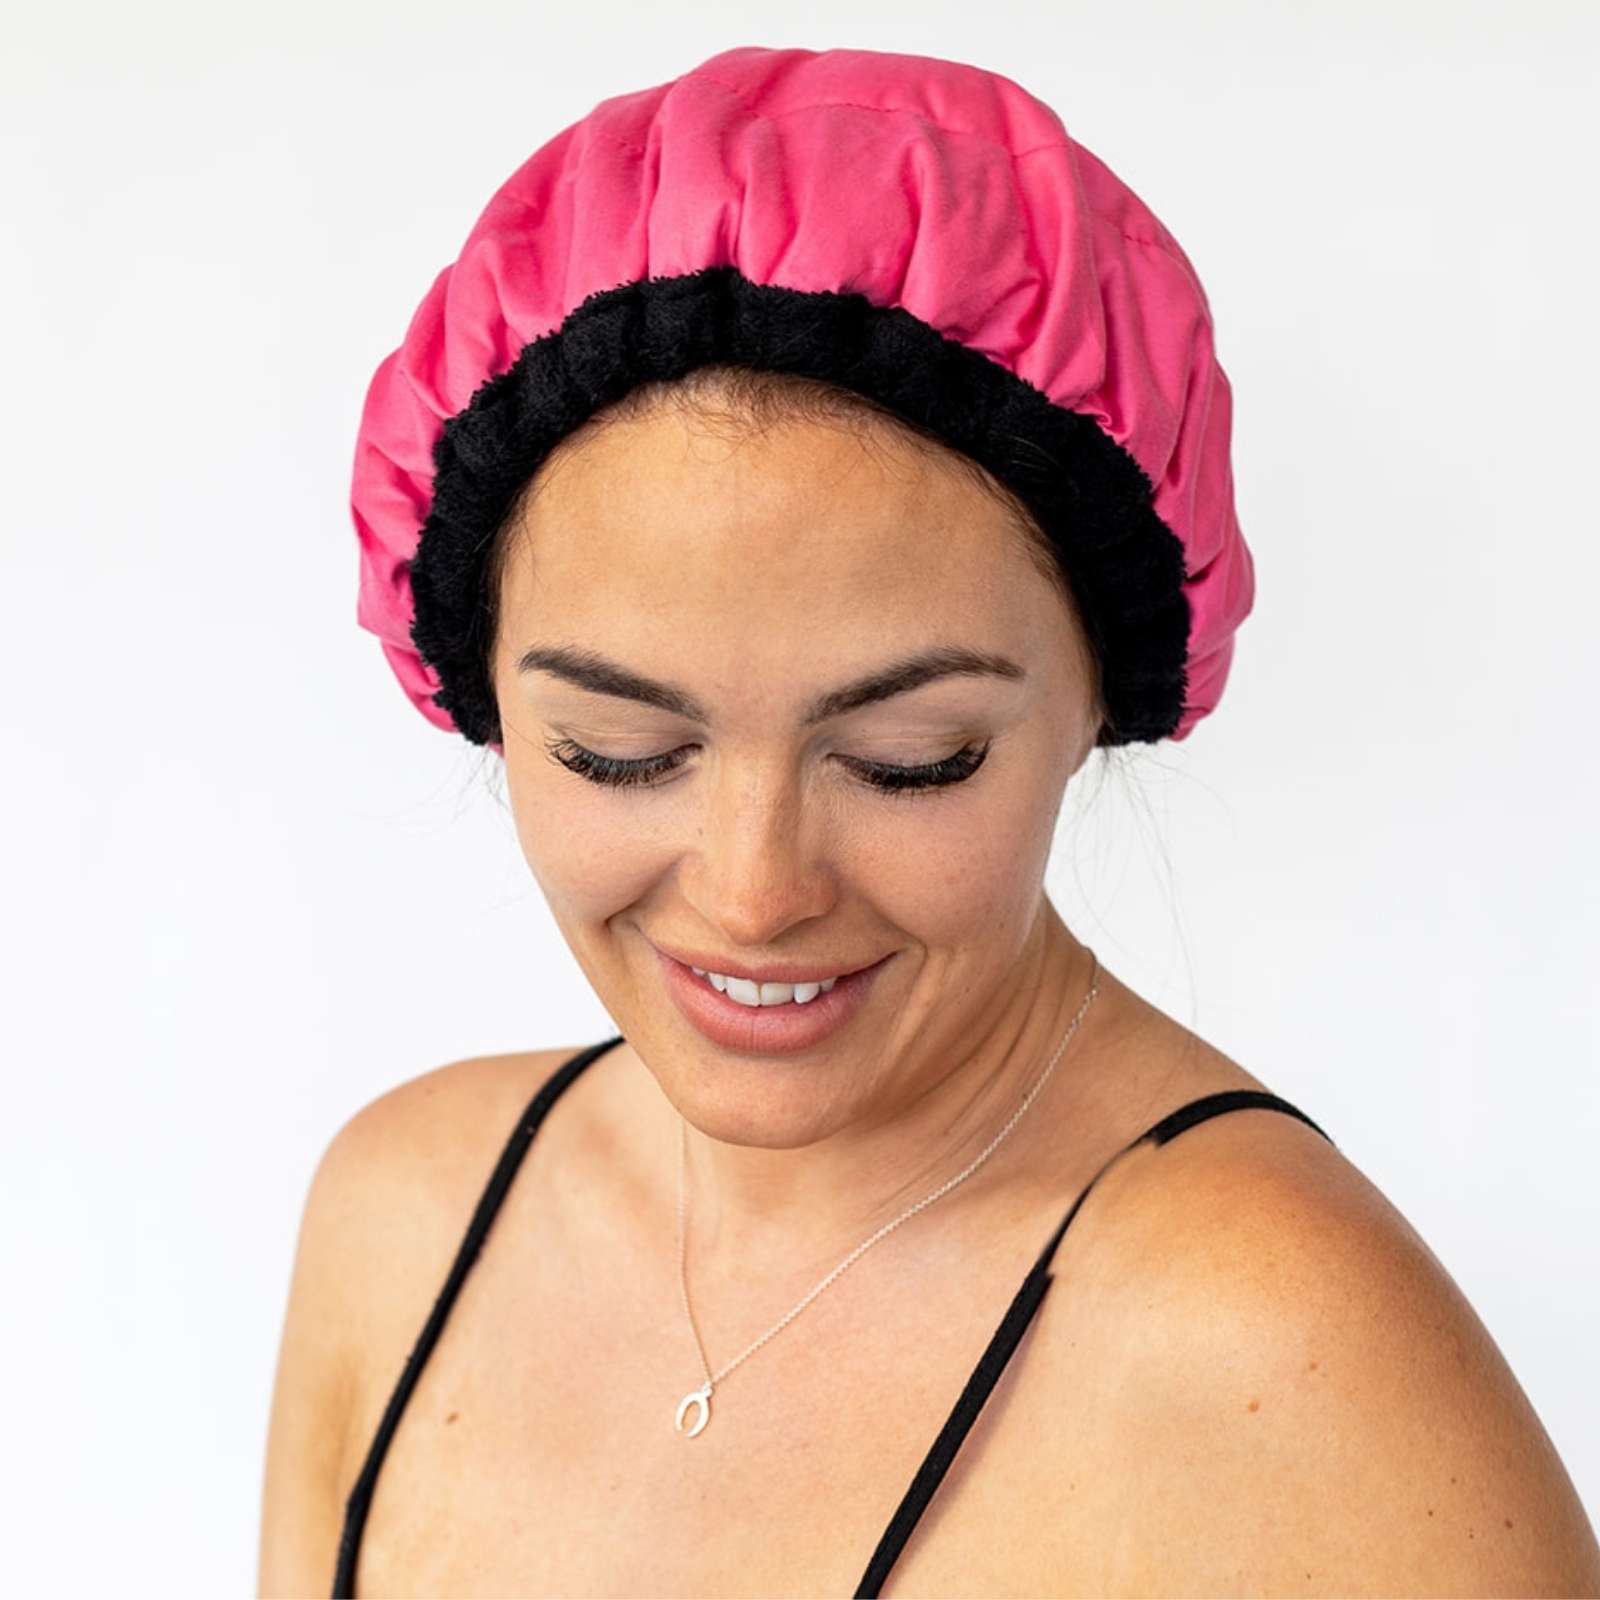 Woman wearing pink Lava Cap microwavable heat cap for hair treatments